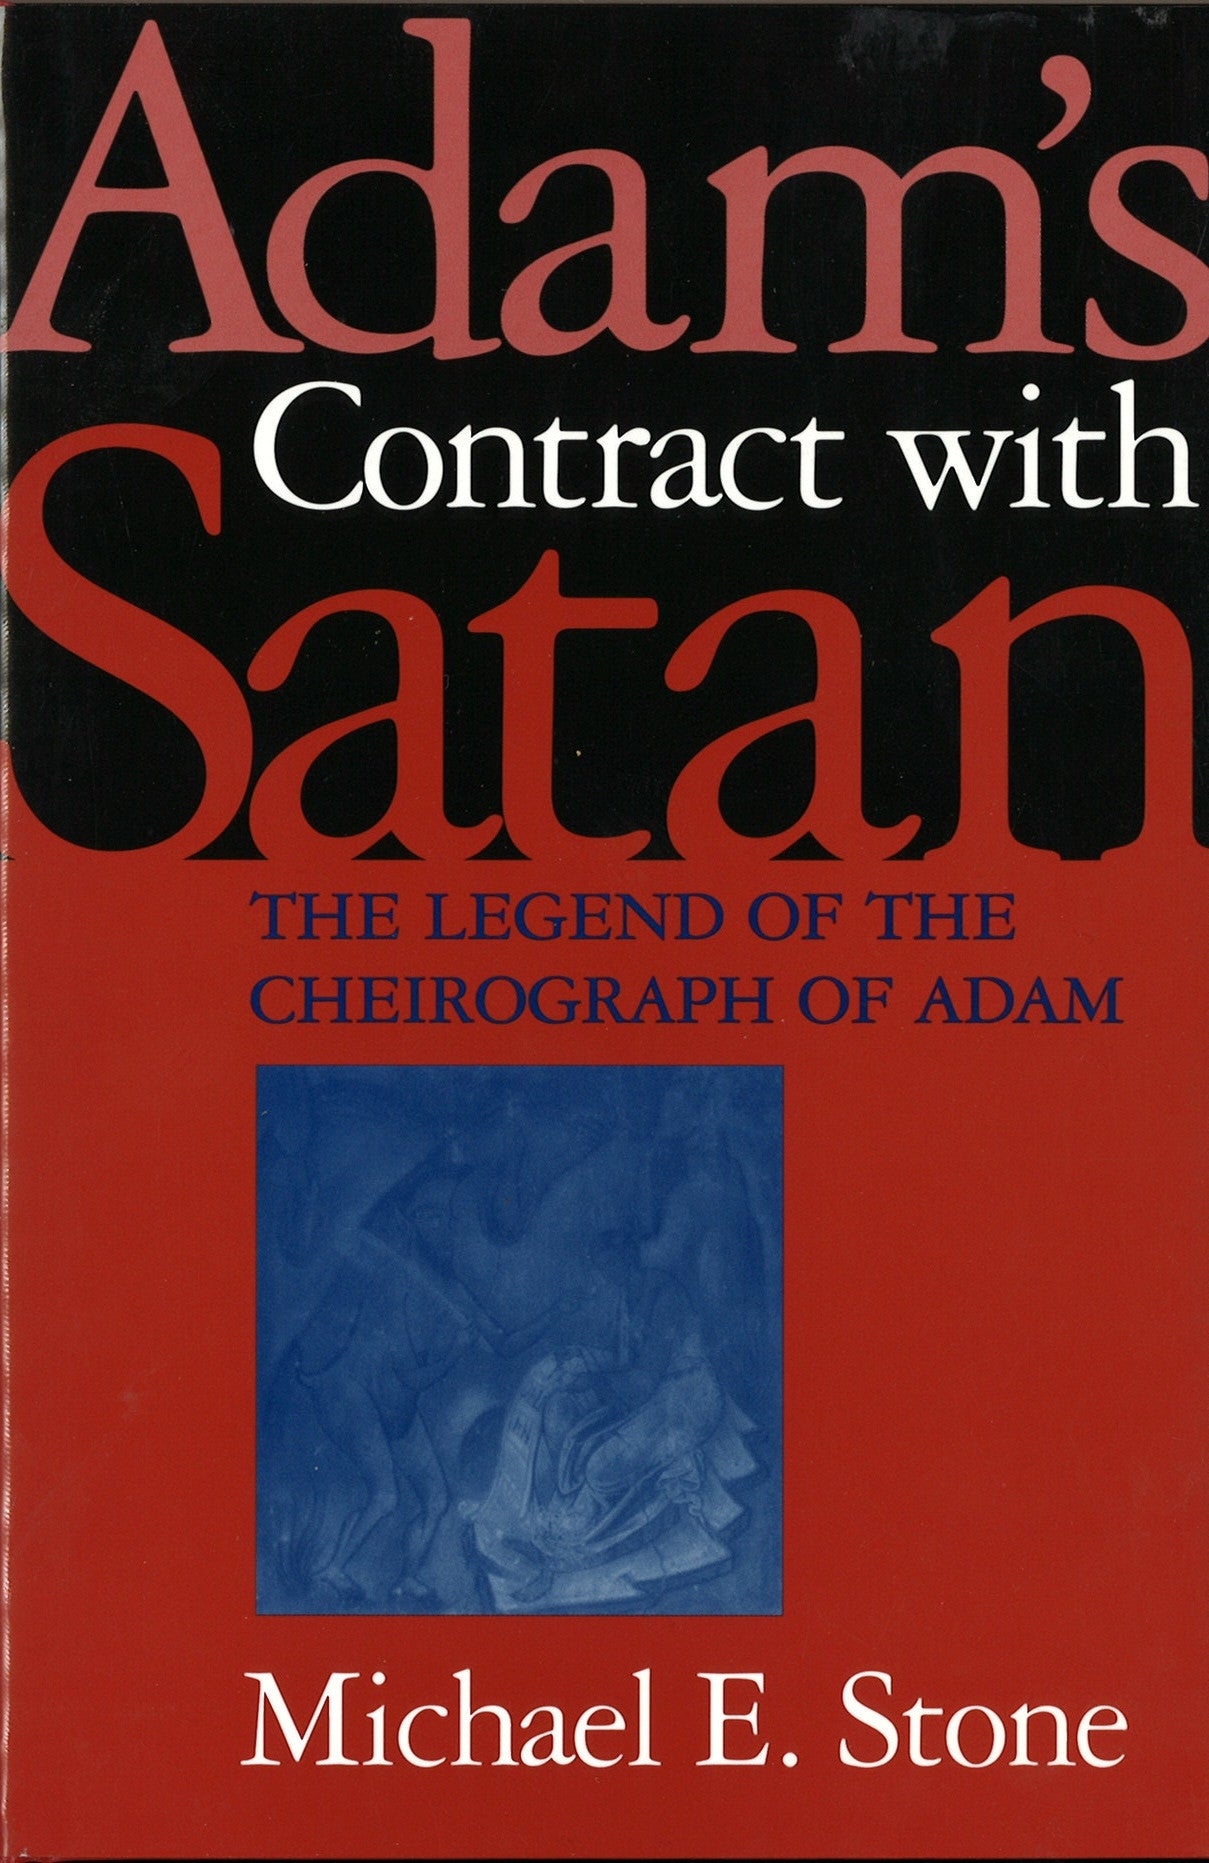 ADAM'S CONTRACT WITH SATAN: The Legend of the Cheirograph of Adam